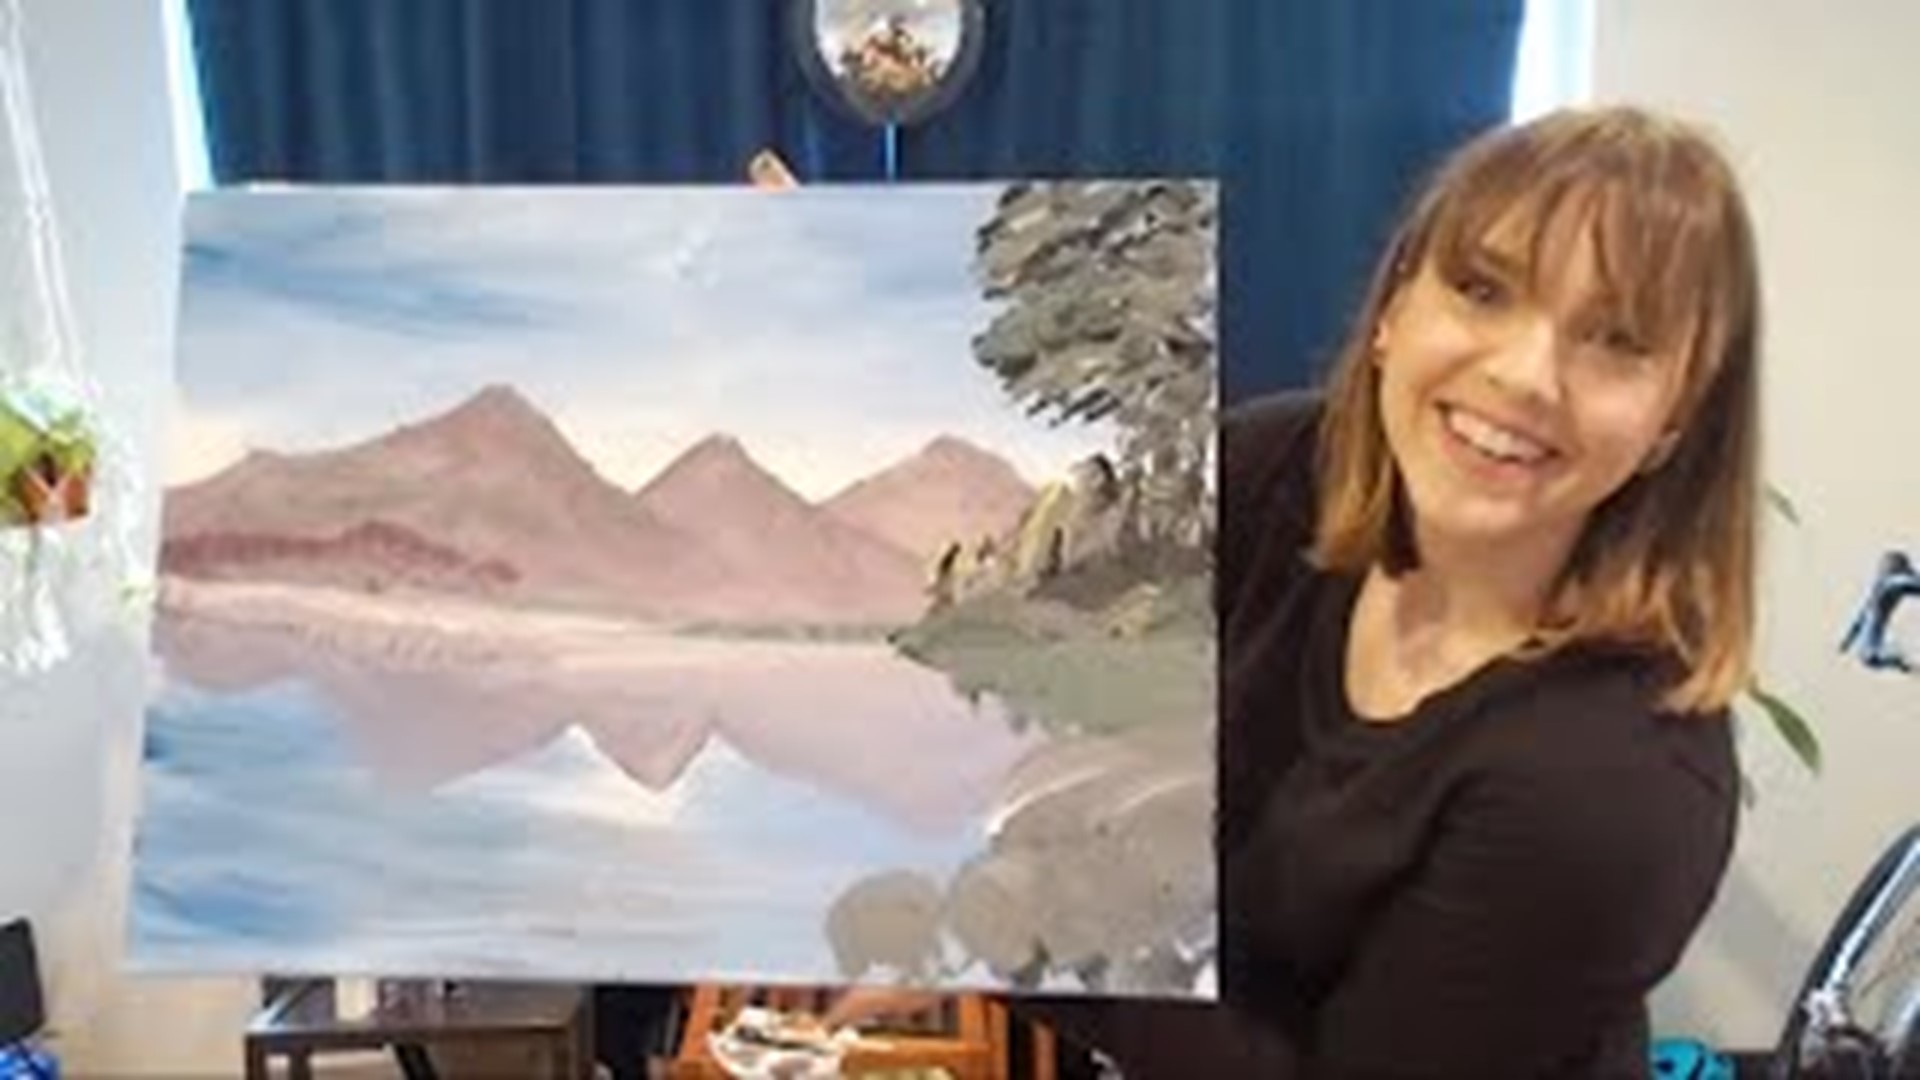 I attempted a Bob Ross painting tutorial while social distancing